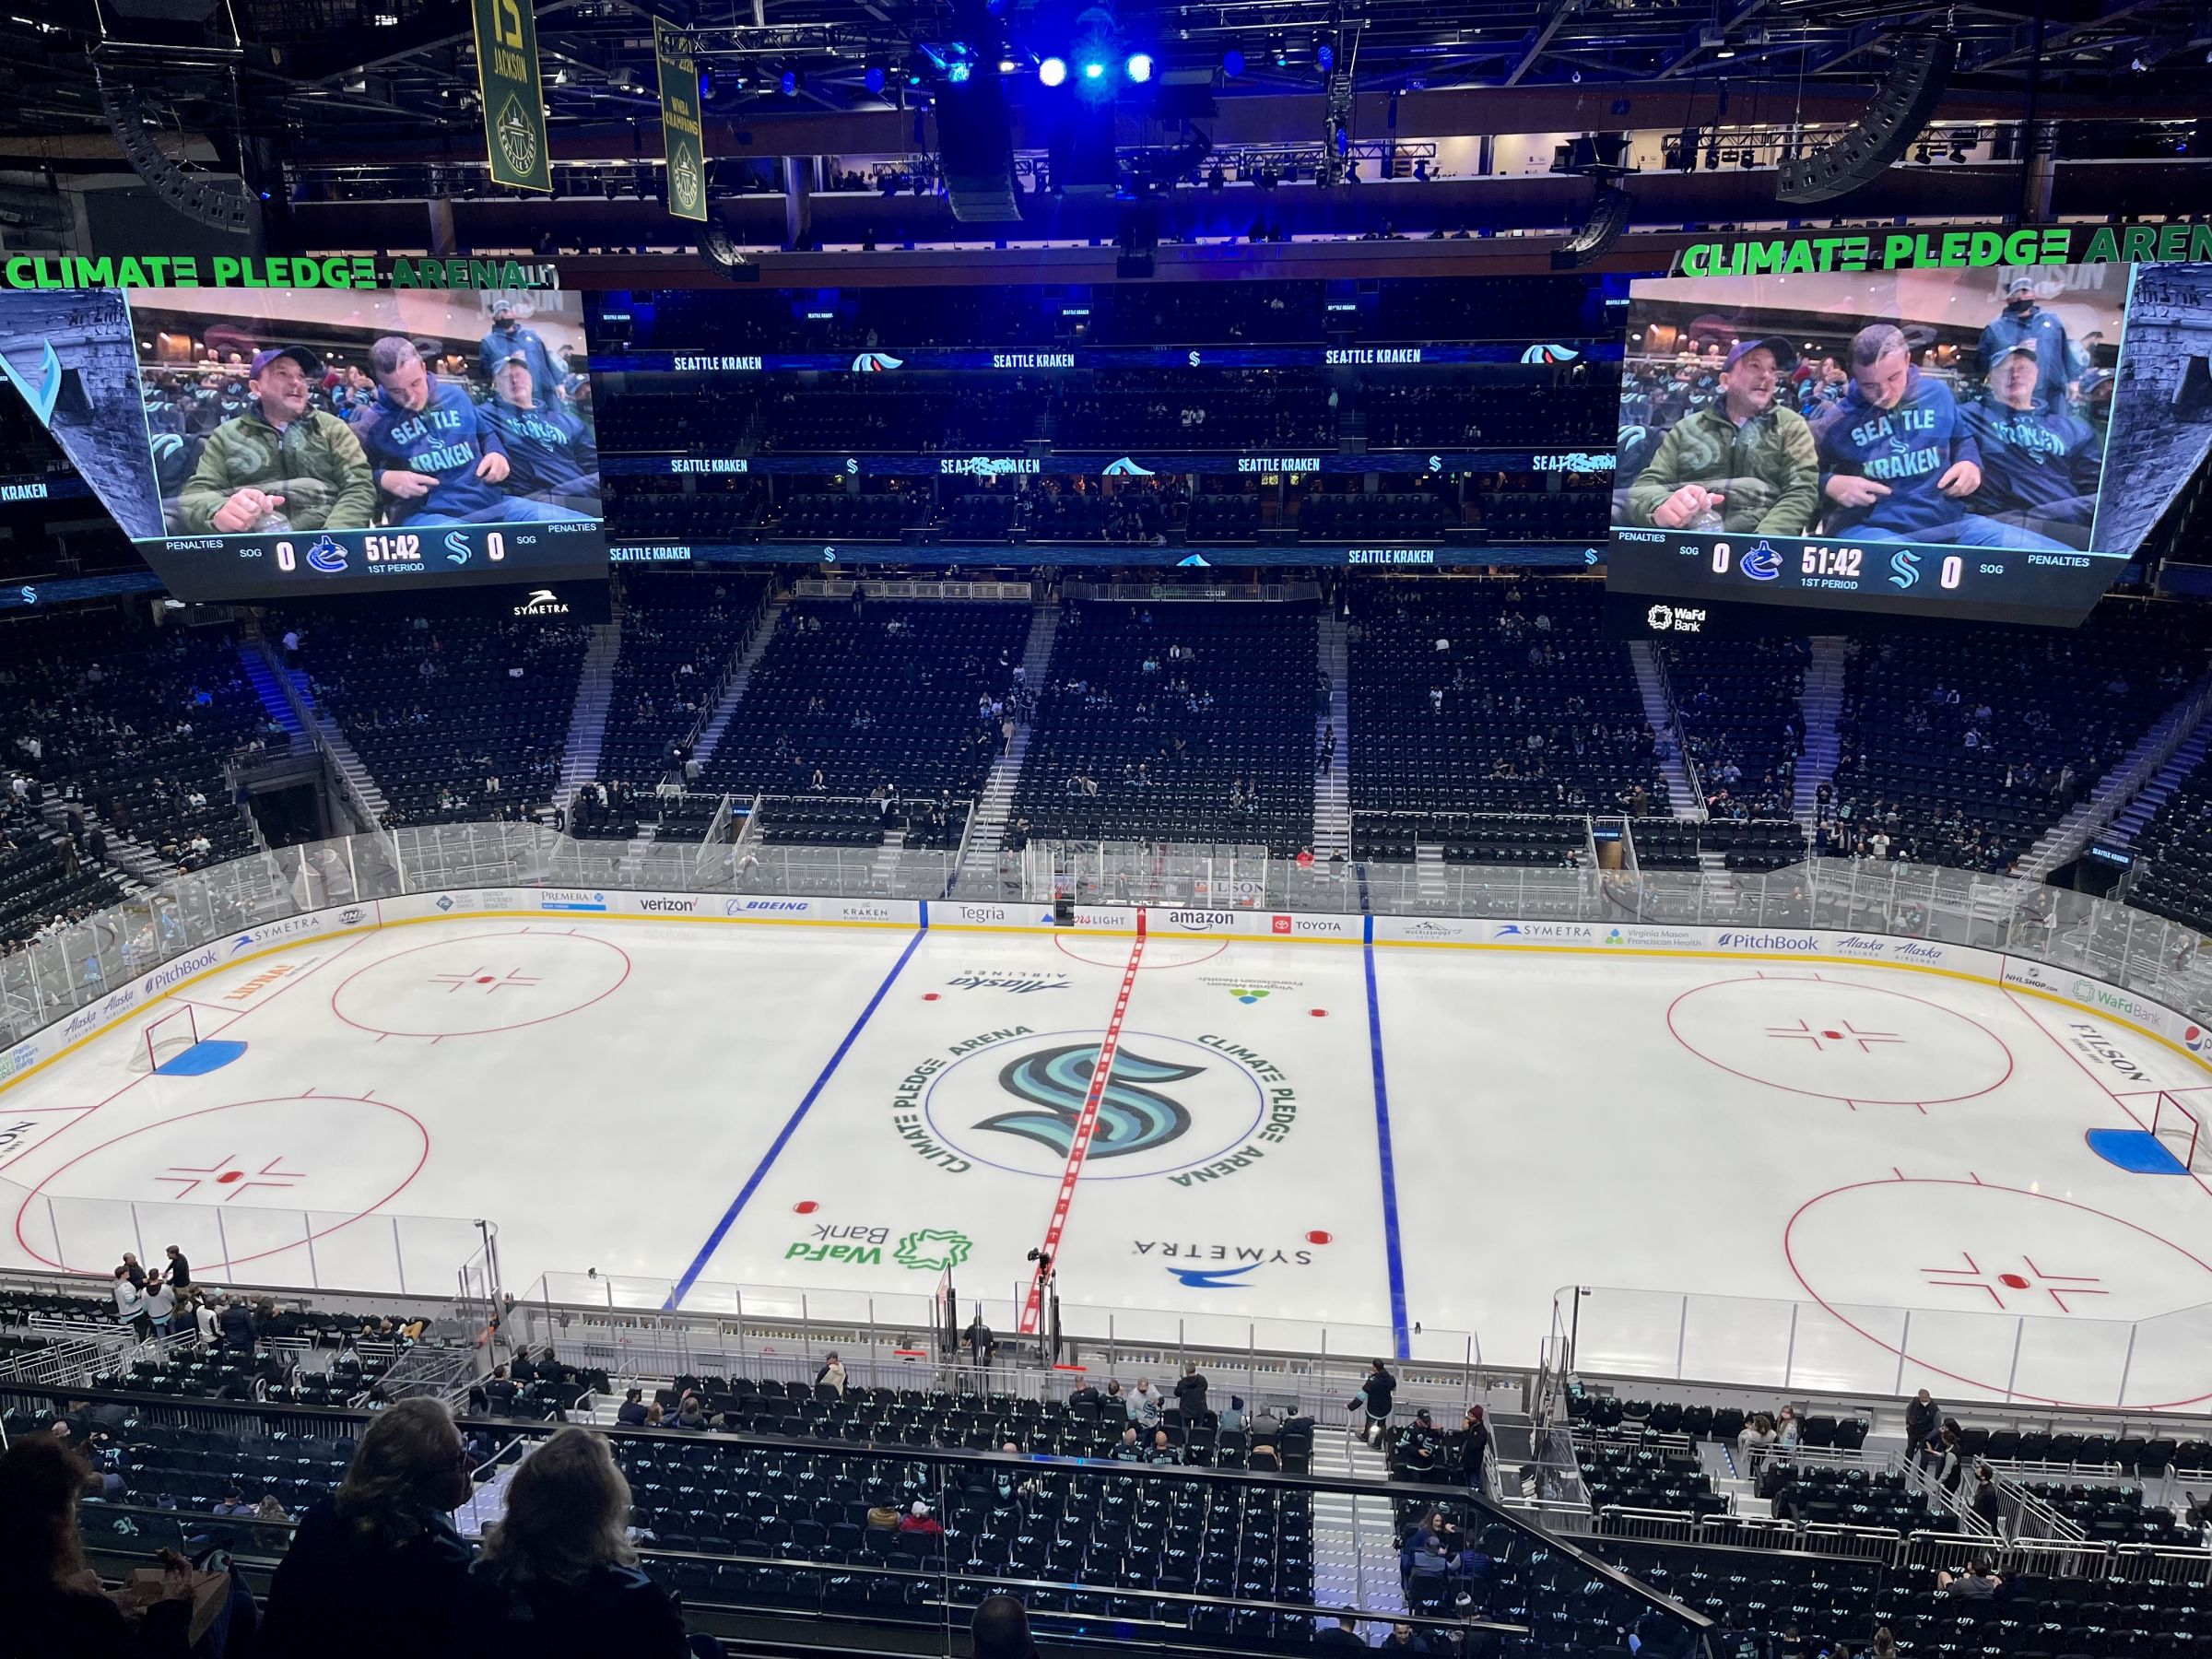 section 201, row a seat view  for hockey - climate pledge arena